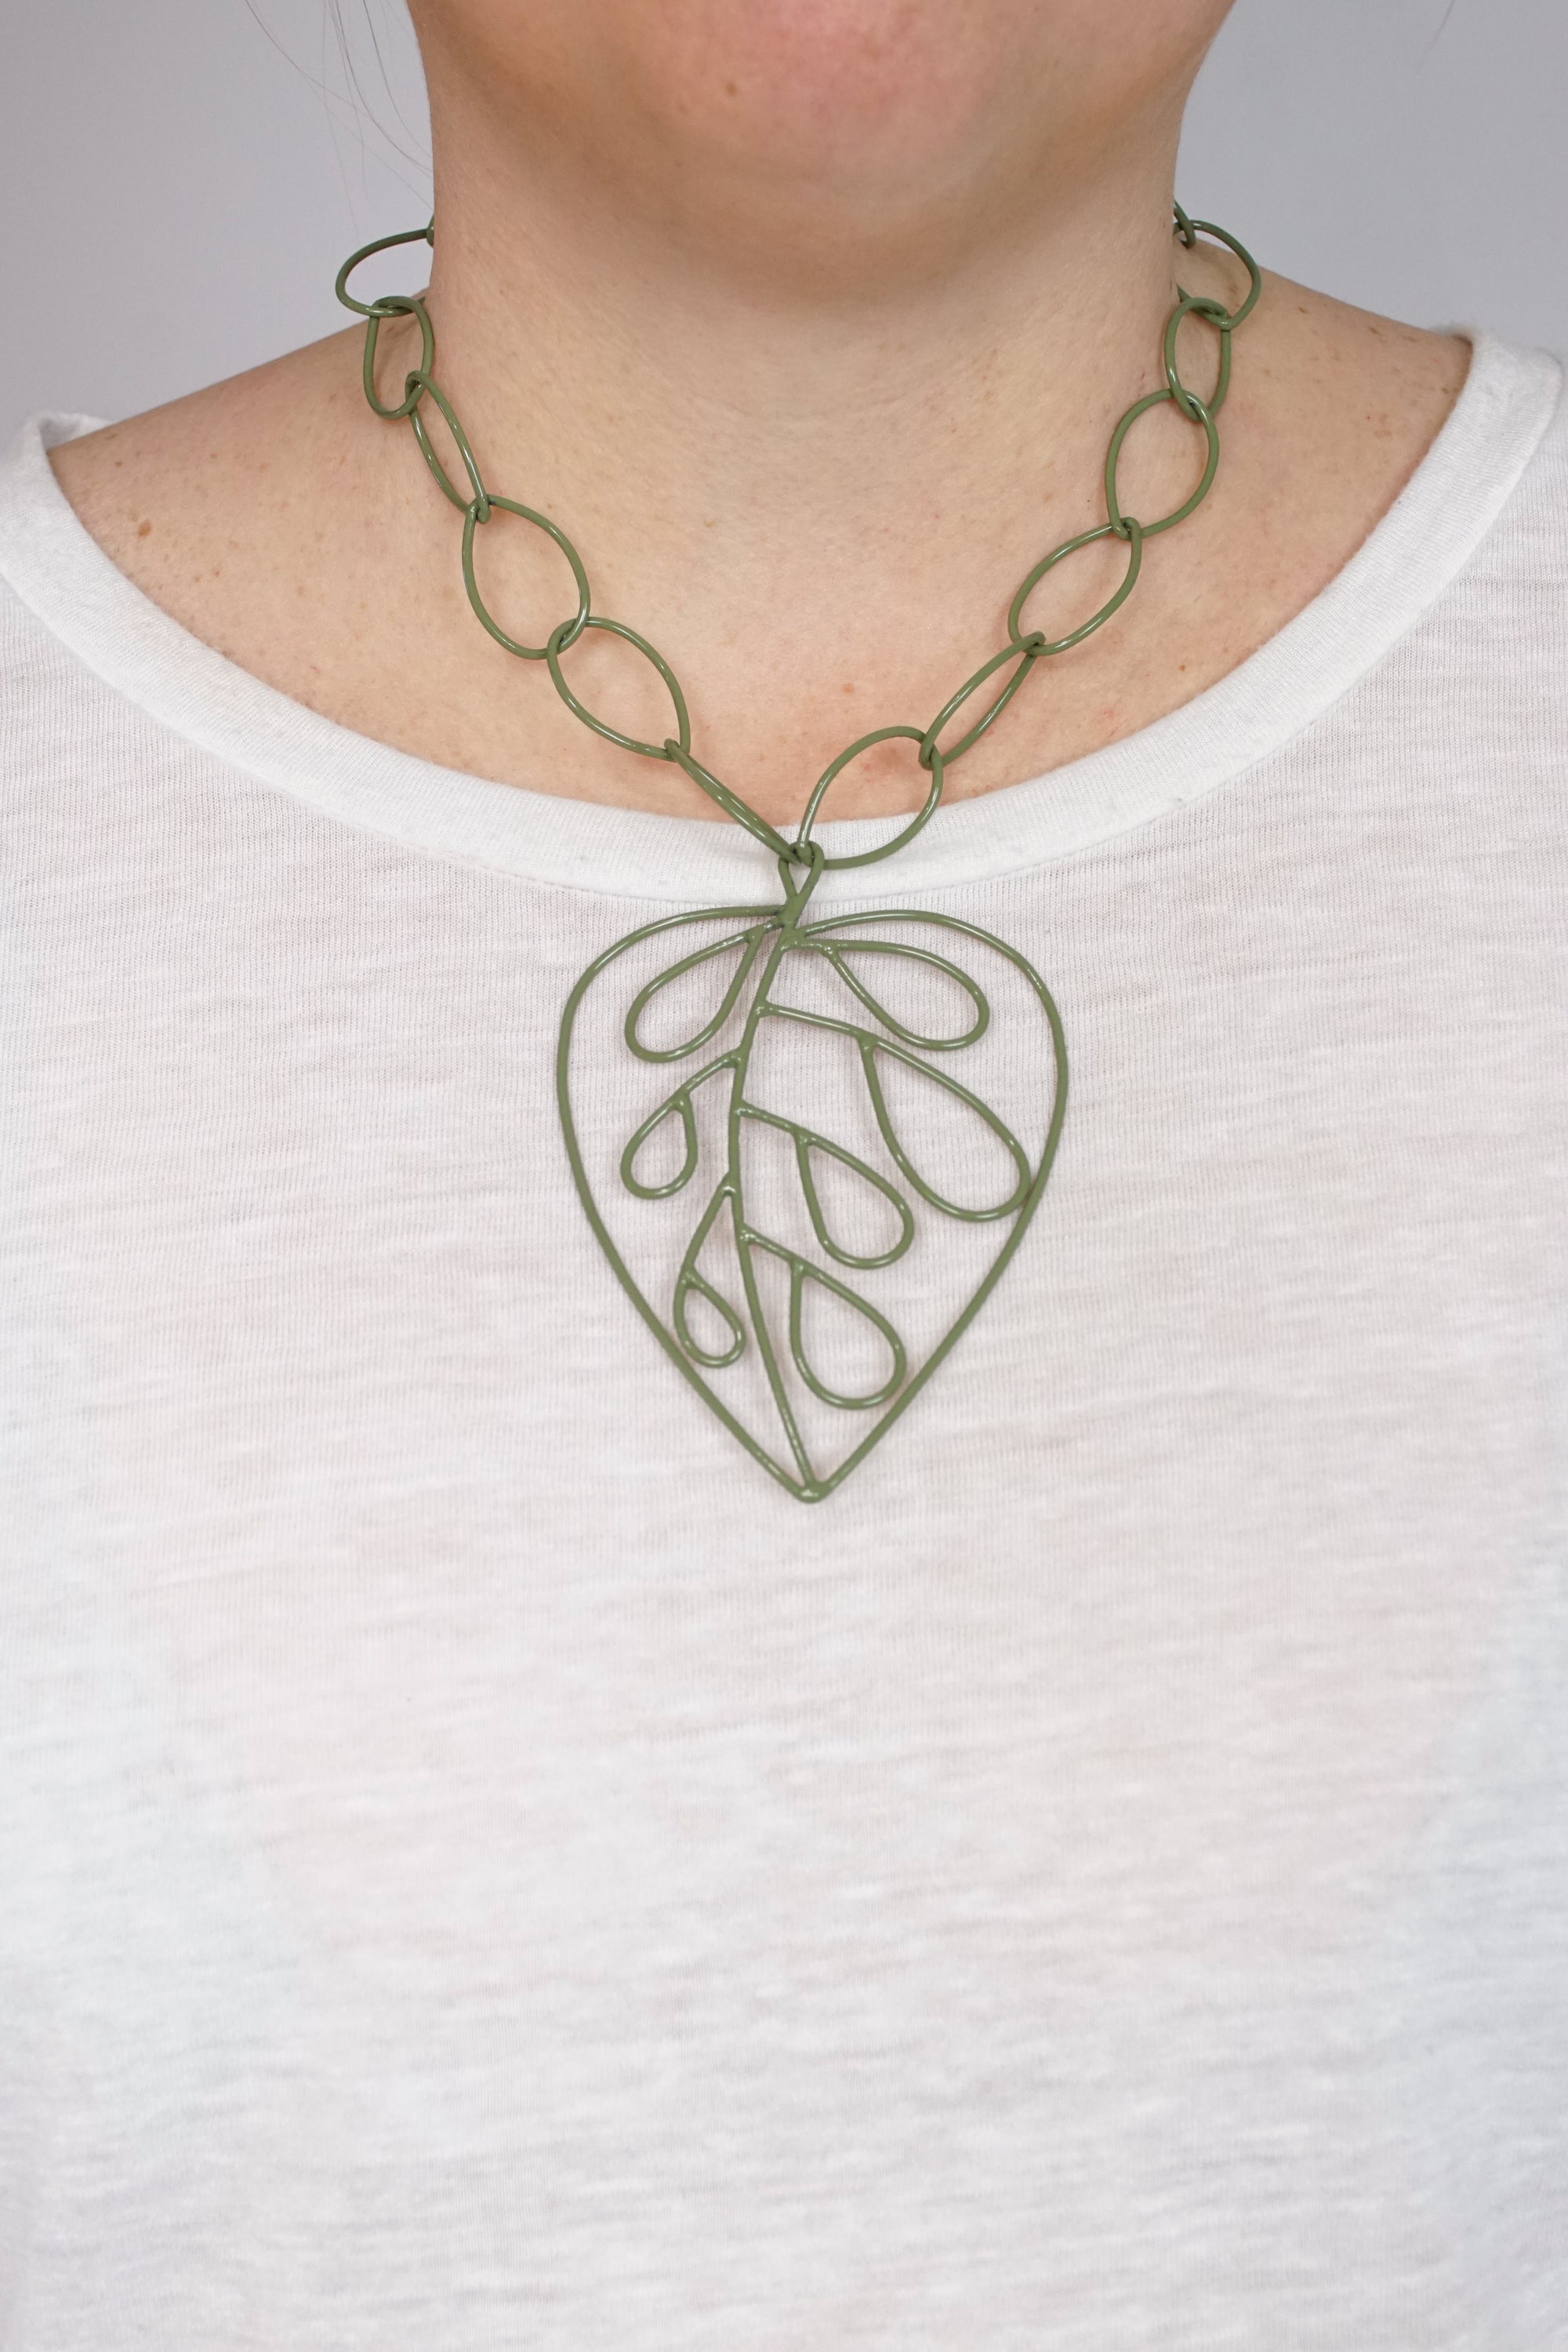 Extra Large Ada Pendant in Olive Green